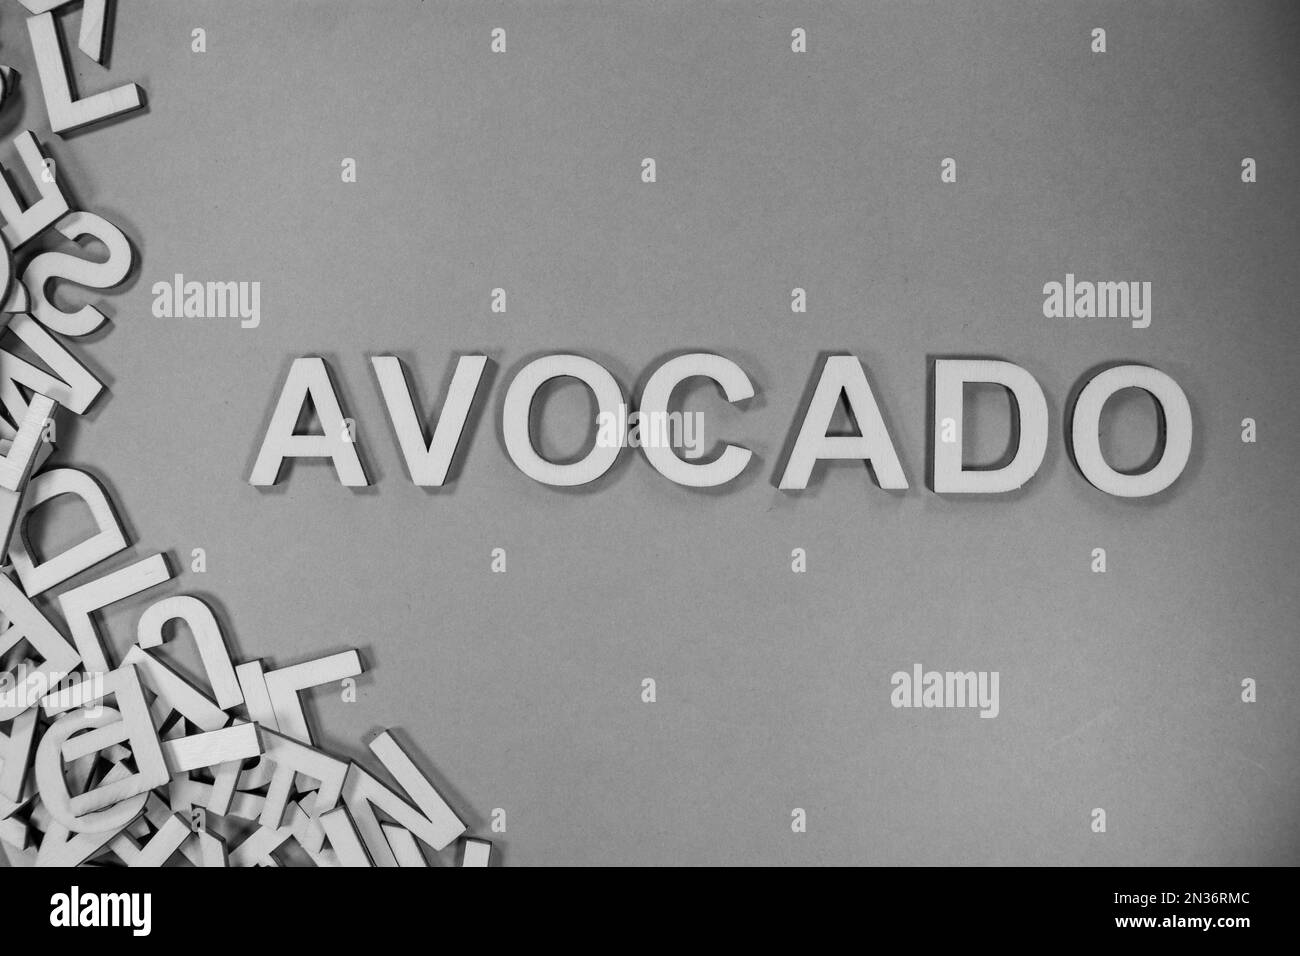 AVOCADO in wooden English language capital letters spilling from a pile of letters in black and white Stock Photo